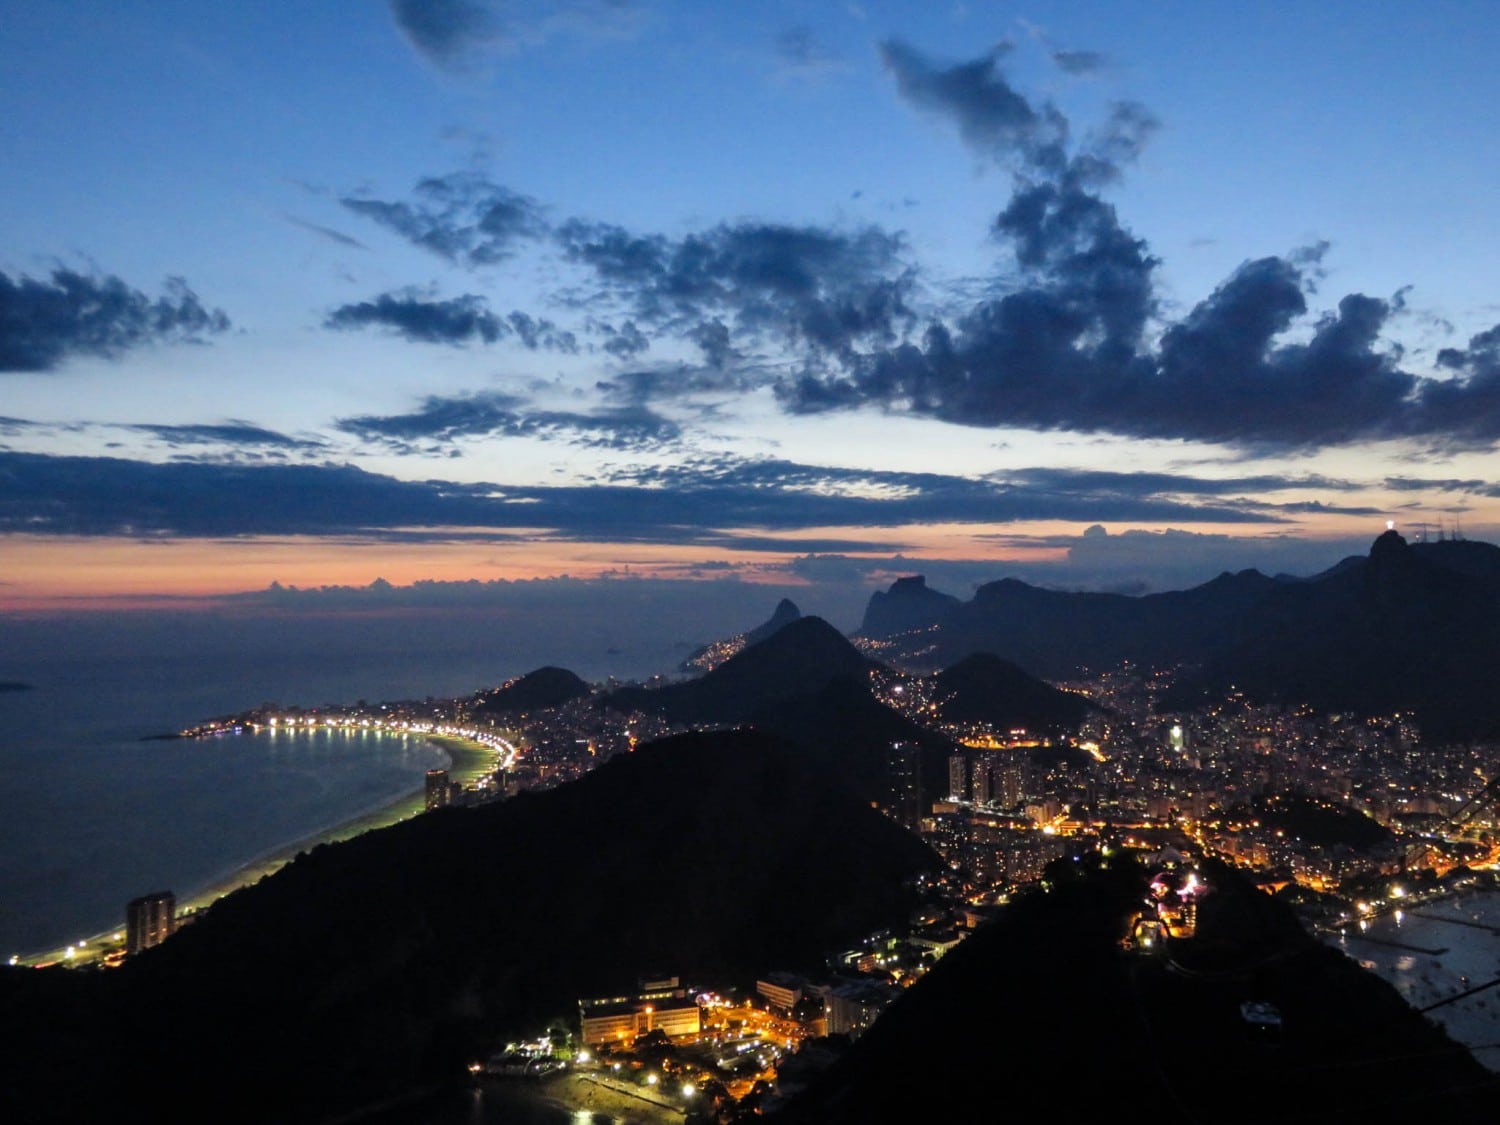 The View at Sunset from the Sugar Loaf Mountain Brazil